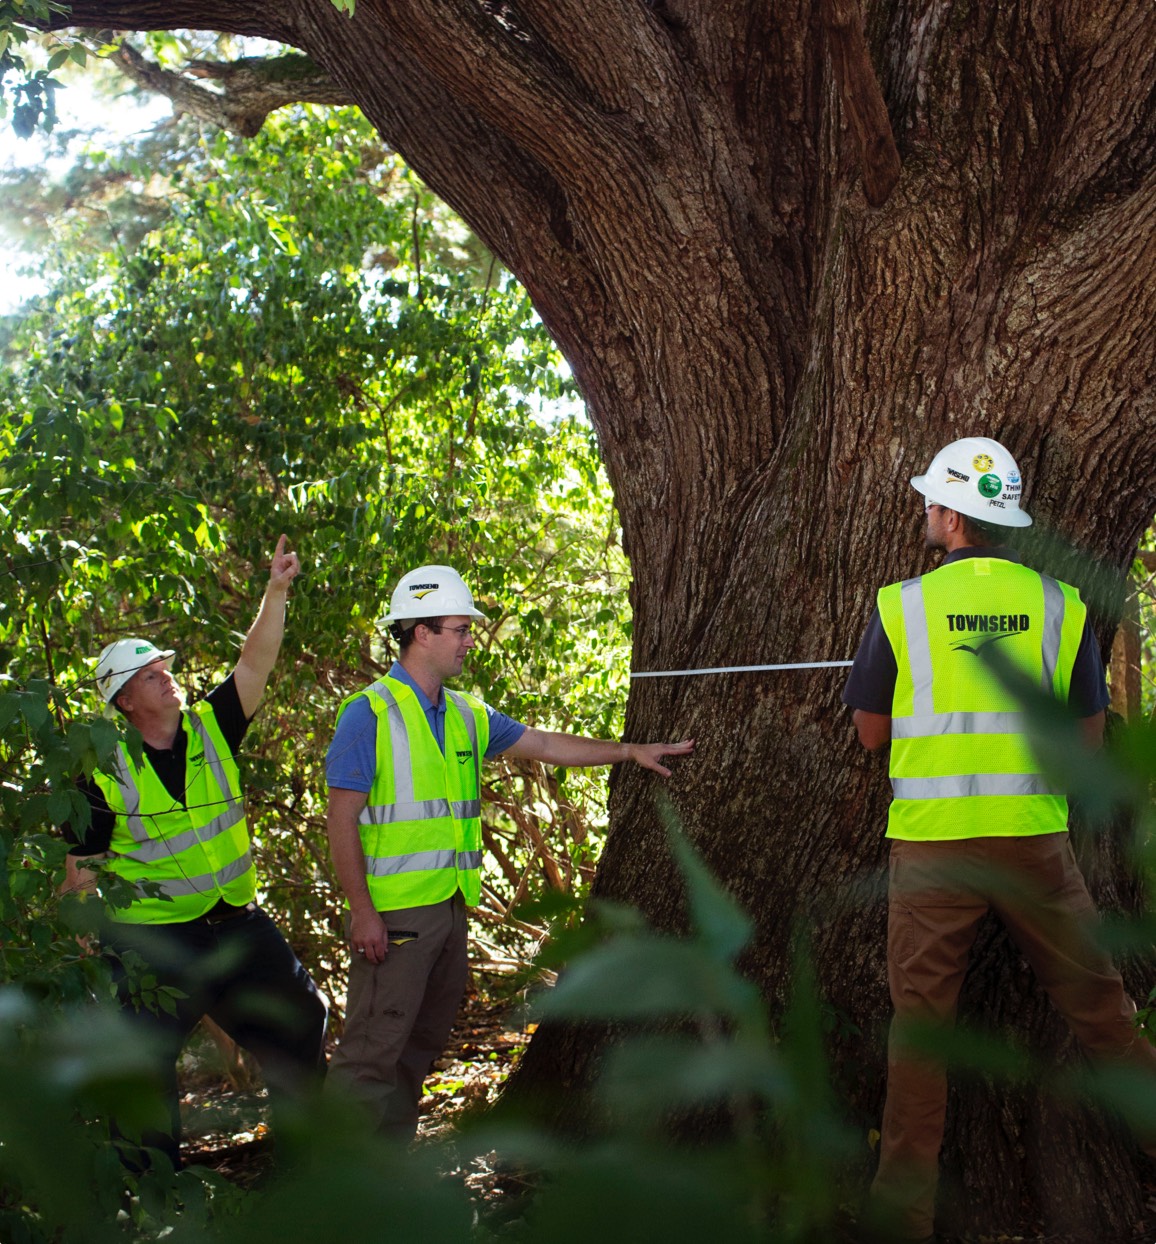 Comprehensive tree care services from qualified experts available now from Townsend Arborcare.